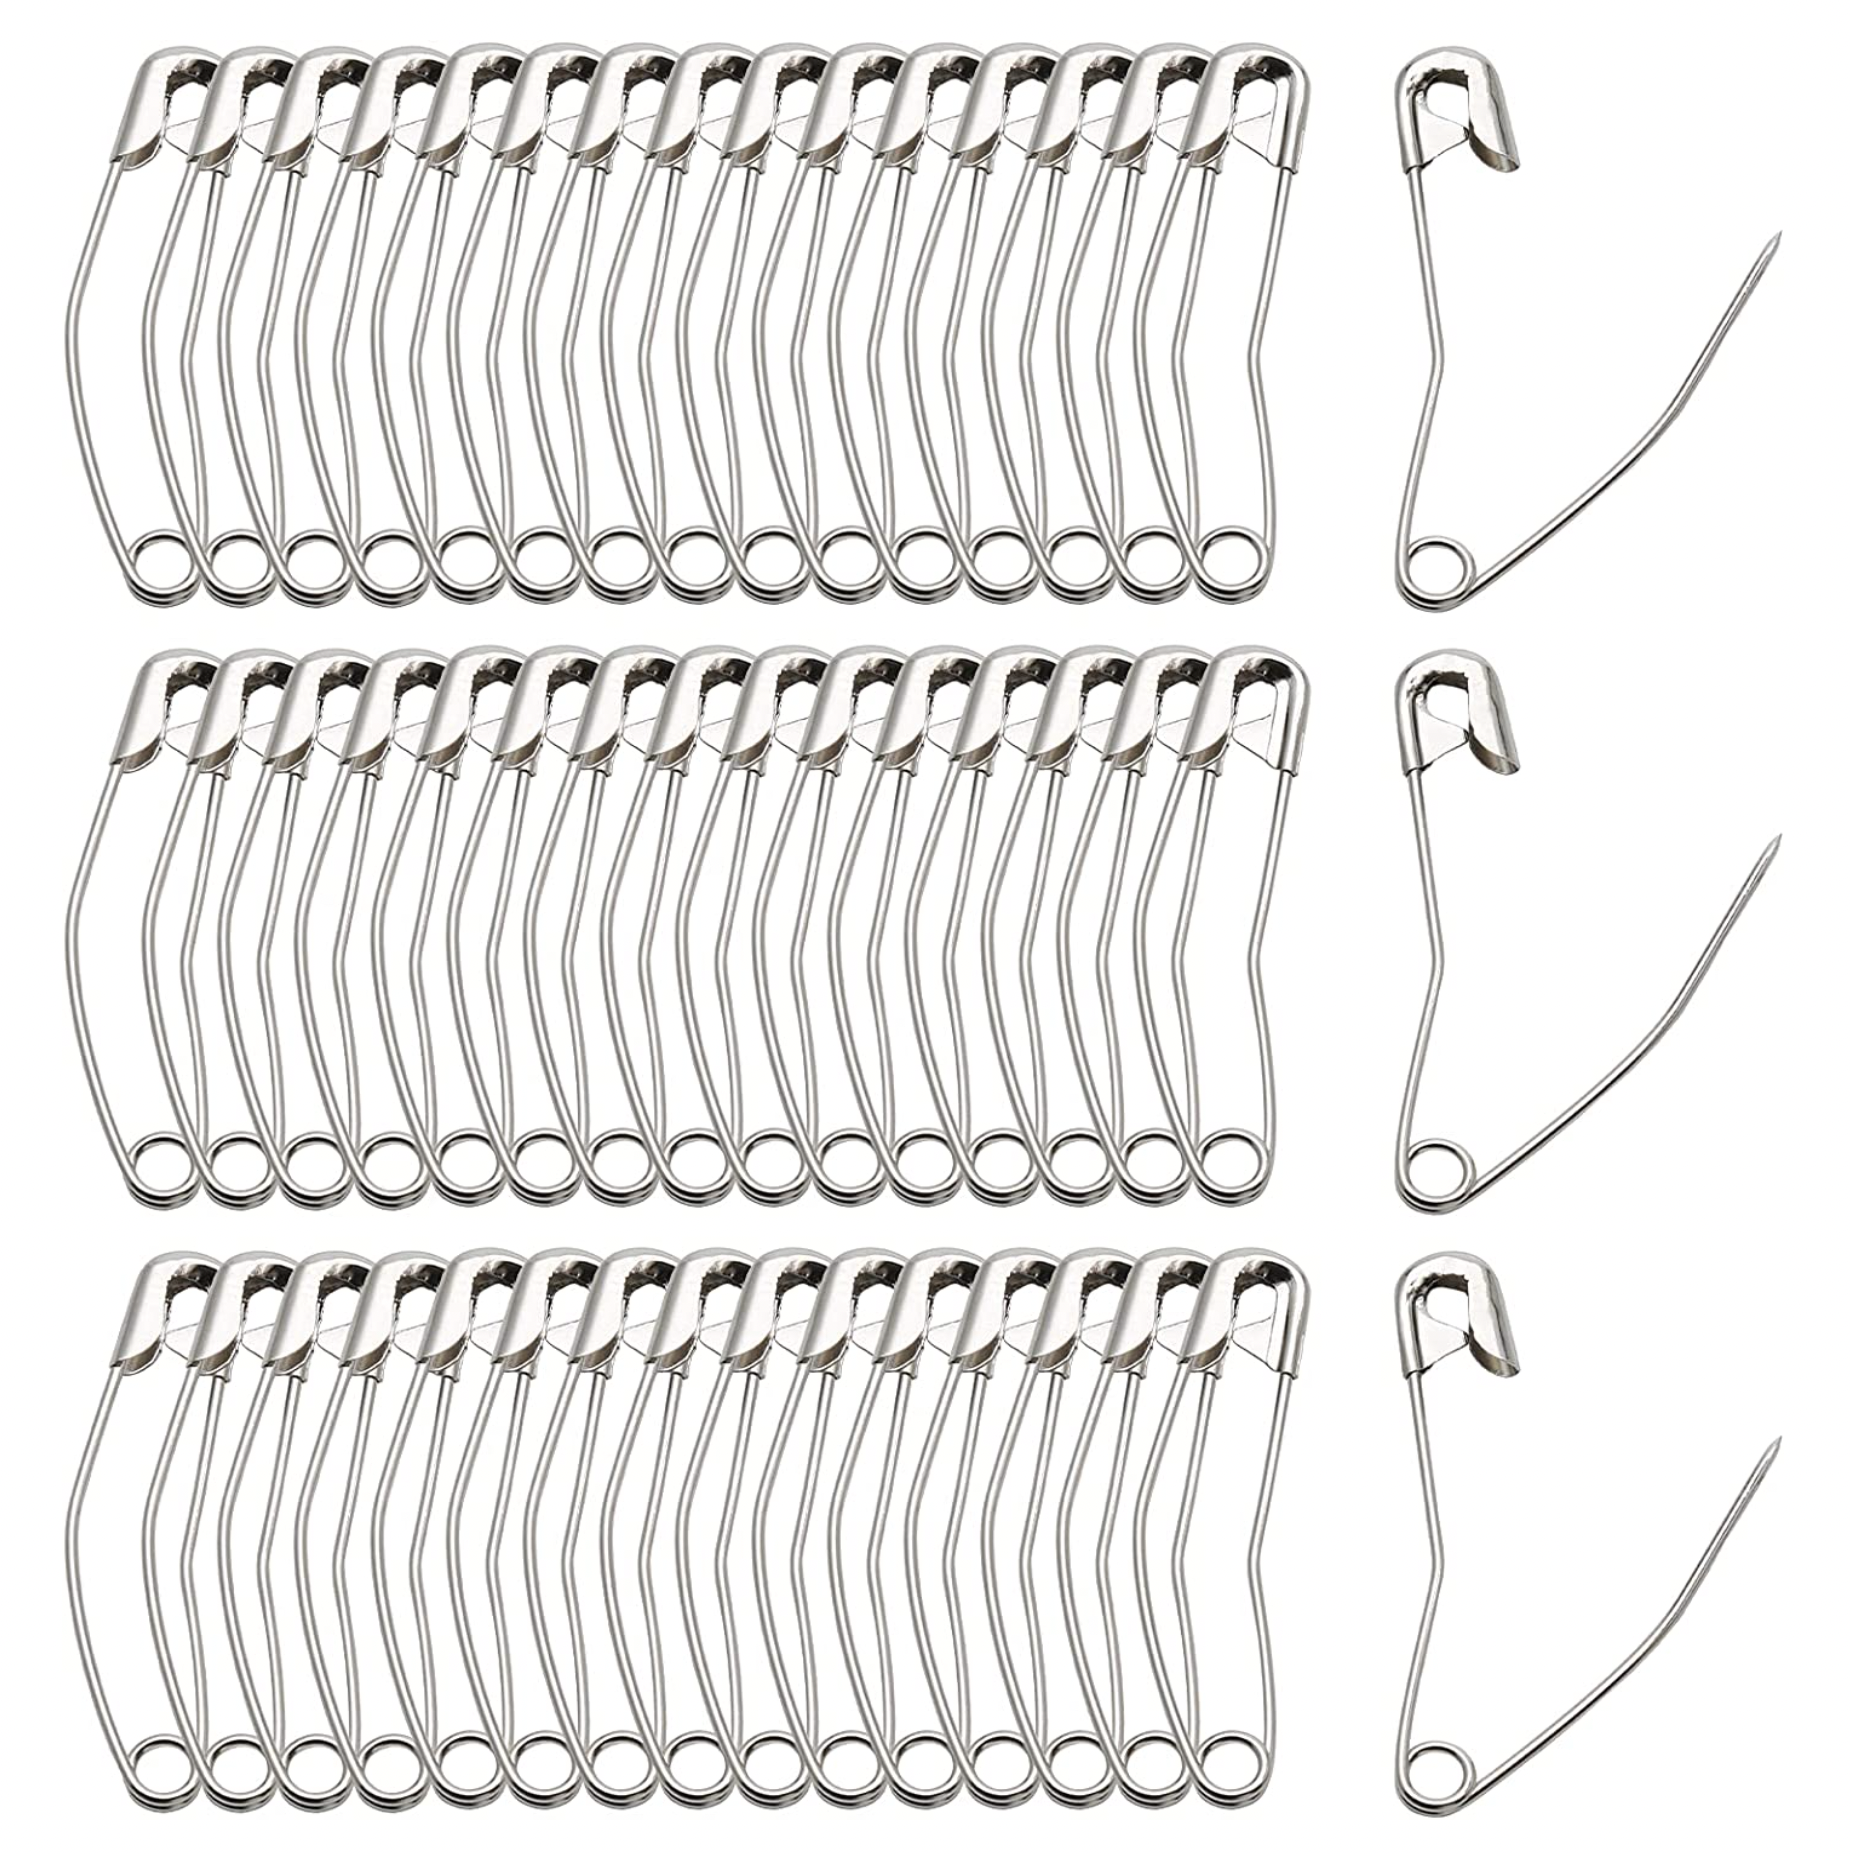 Curved Safety Pins - Lined Up In Rows - Image - Quiltblox.com